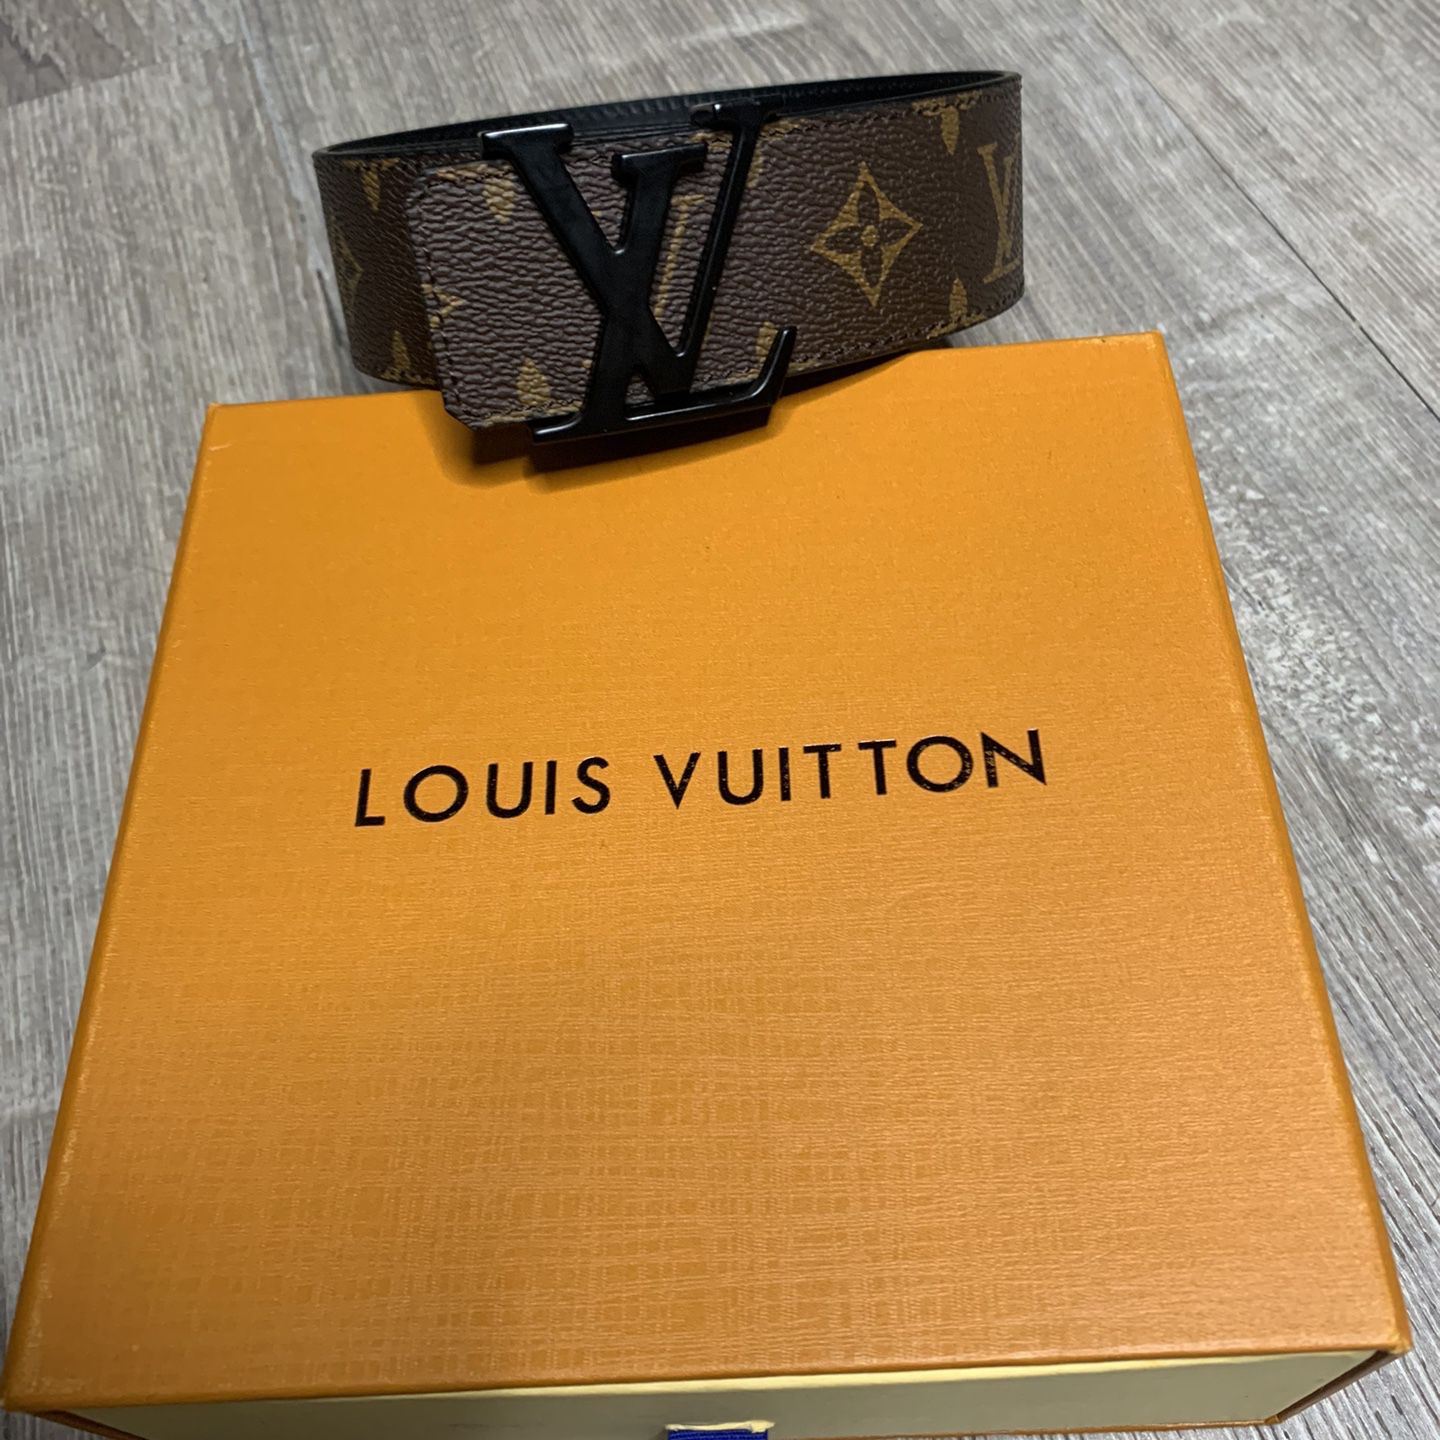 LV Men’s Belt- Size 36 for Sale in New York, NY - OfferUp